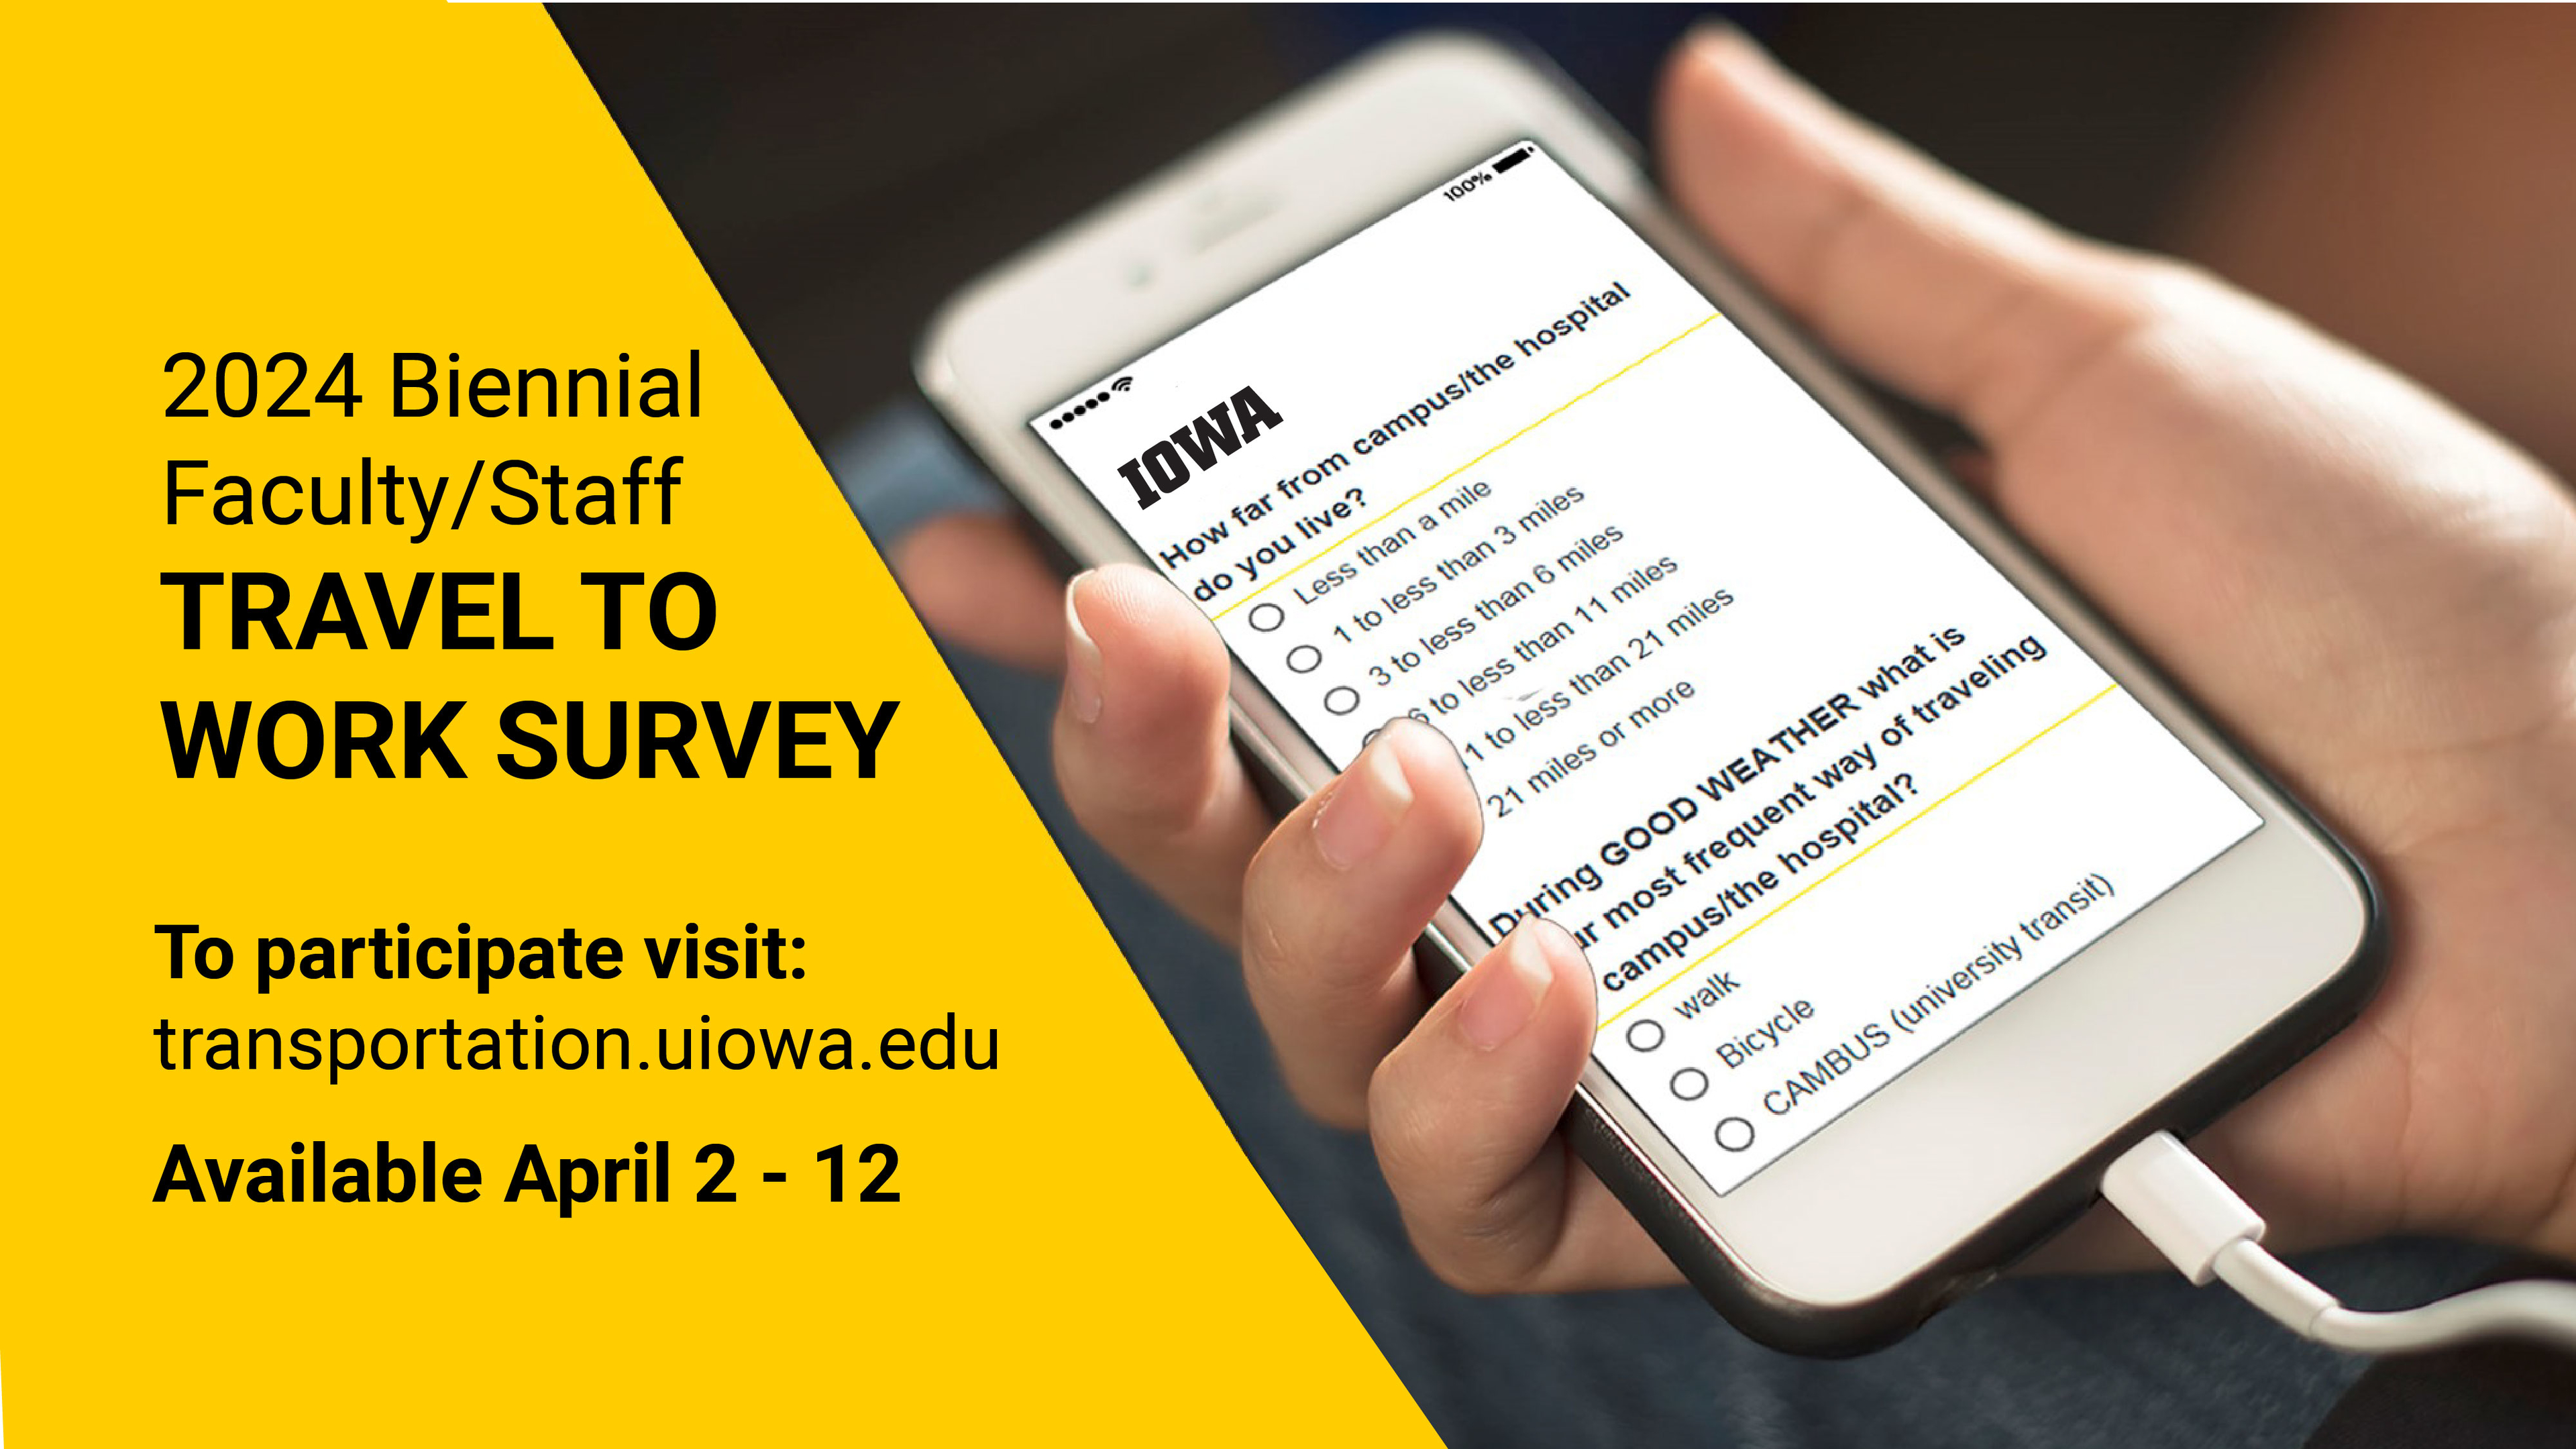 Graphic showing date and website for 2024 biennial travel to work survey for april 2-12